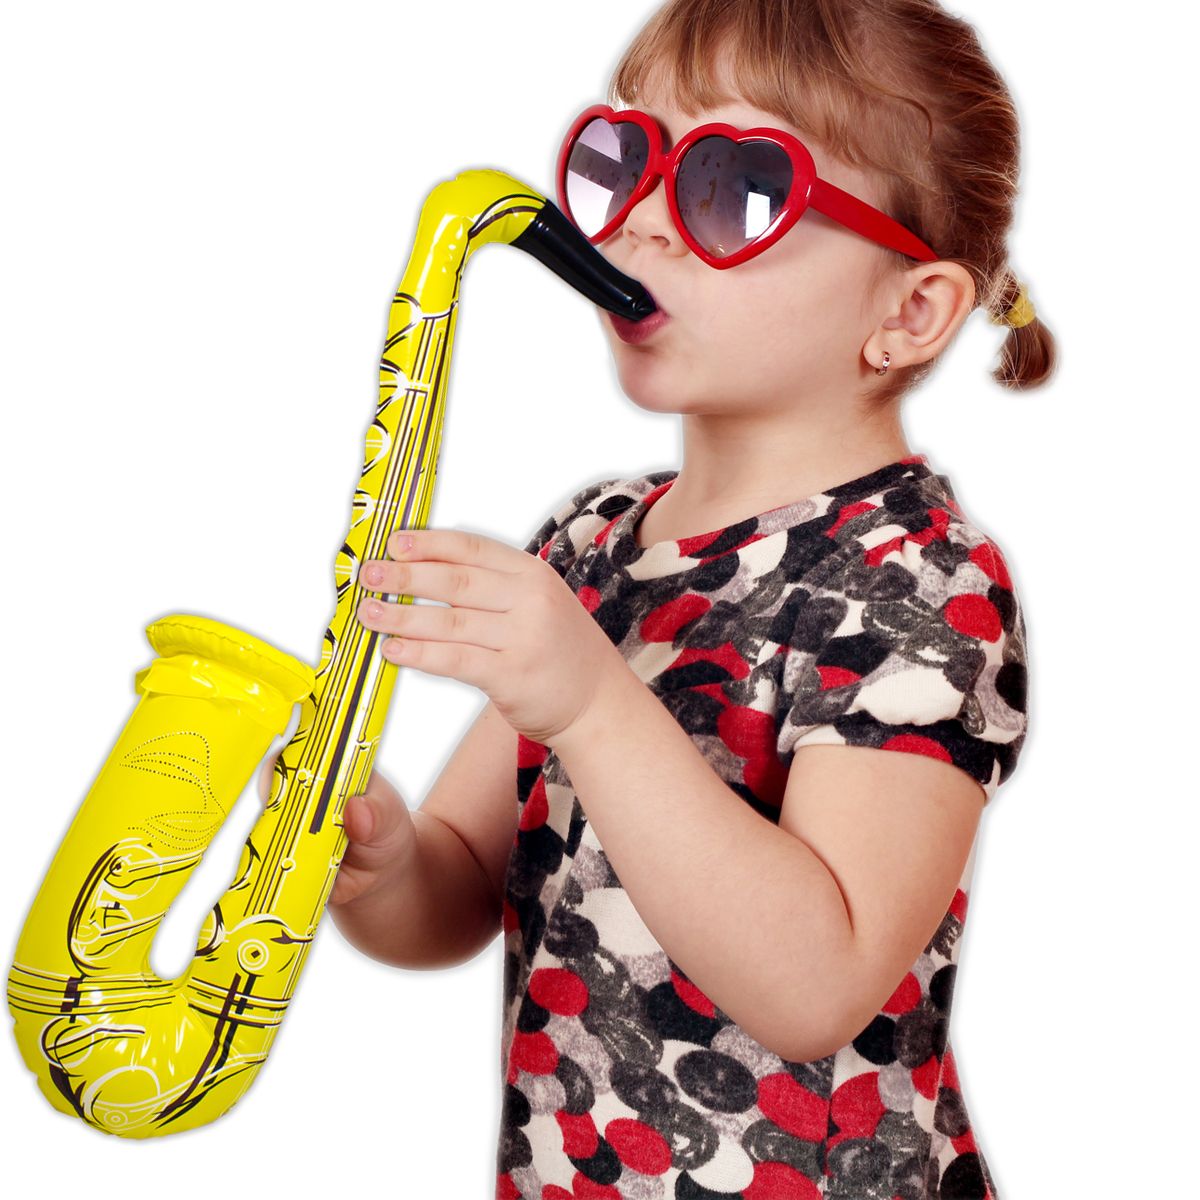 20" INFLATABLE YELLOW SAXOPHONE MUSICAL INSTRUMENT KIDS MUSIC PARTY TOY GIFT 